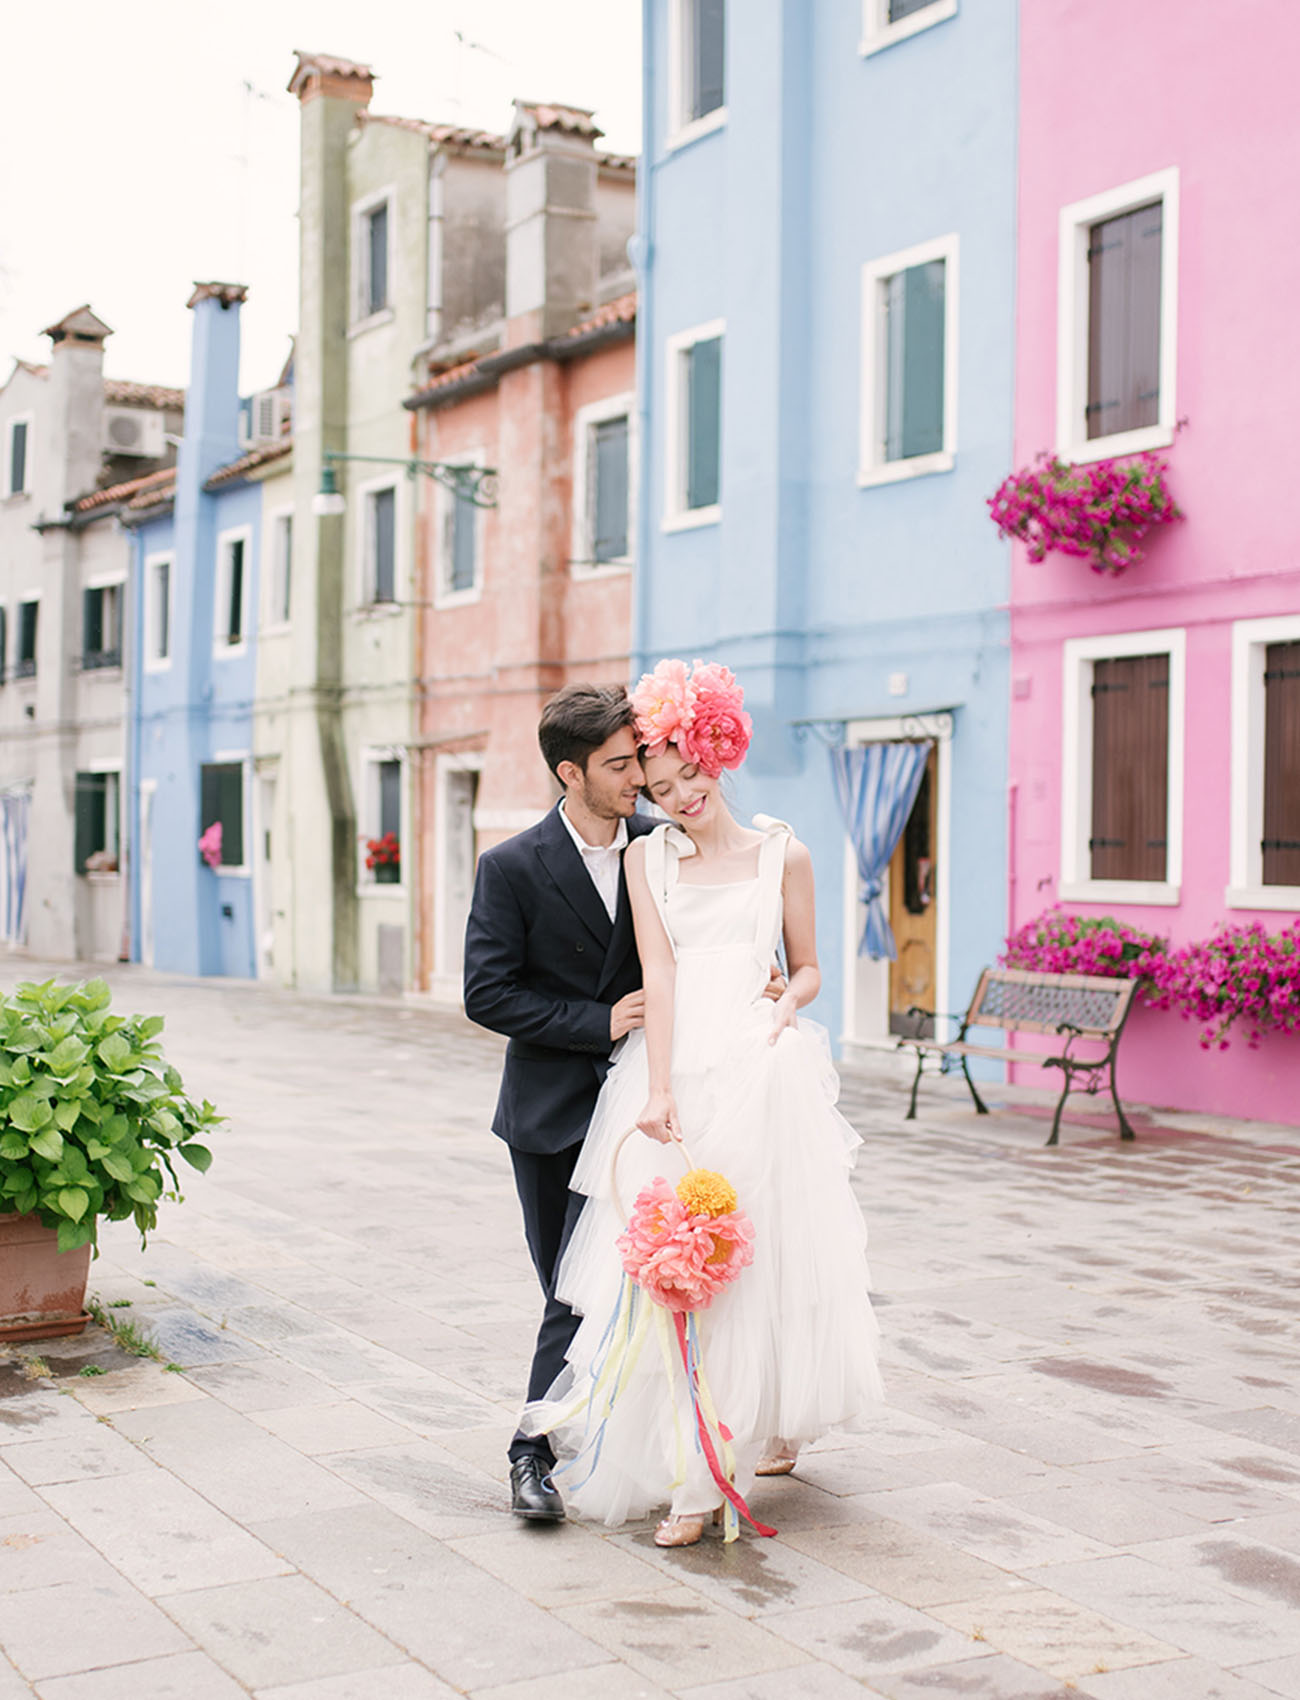 This romantic elopement took place on the island of Burano, a famous colorful island in Venice